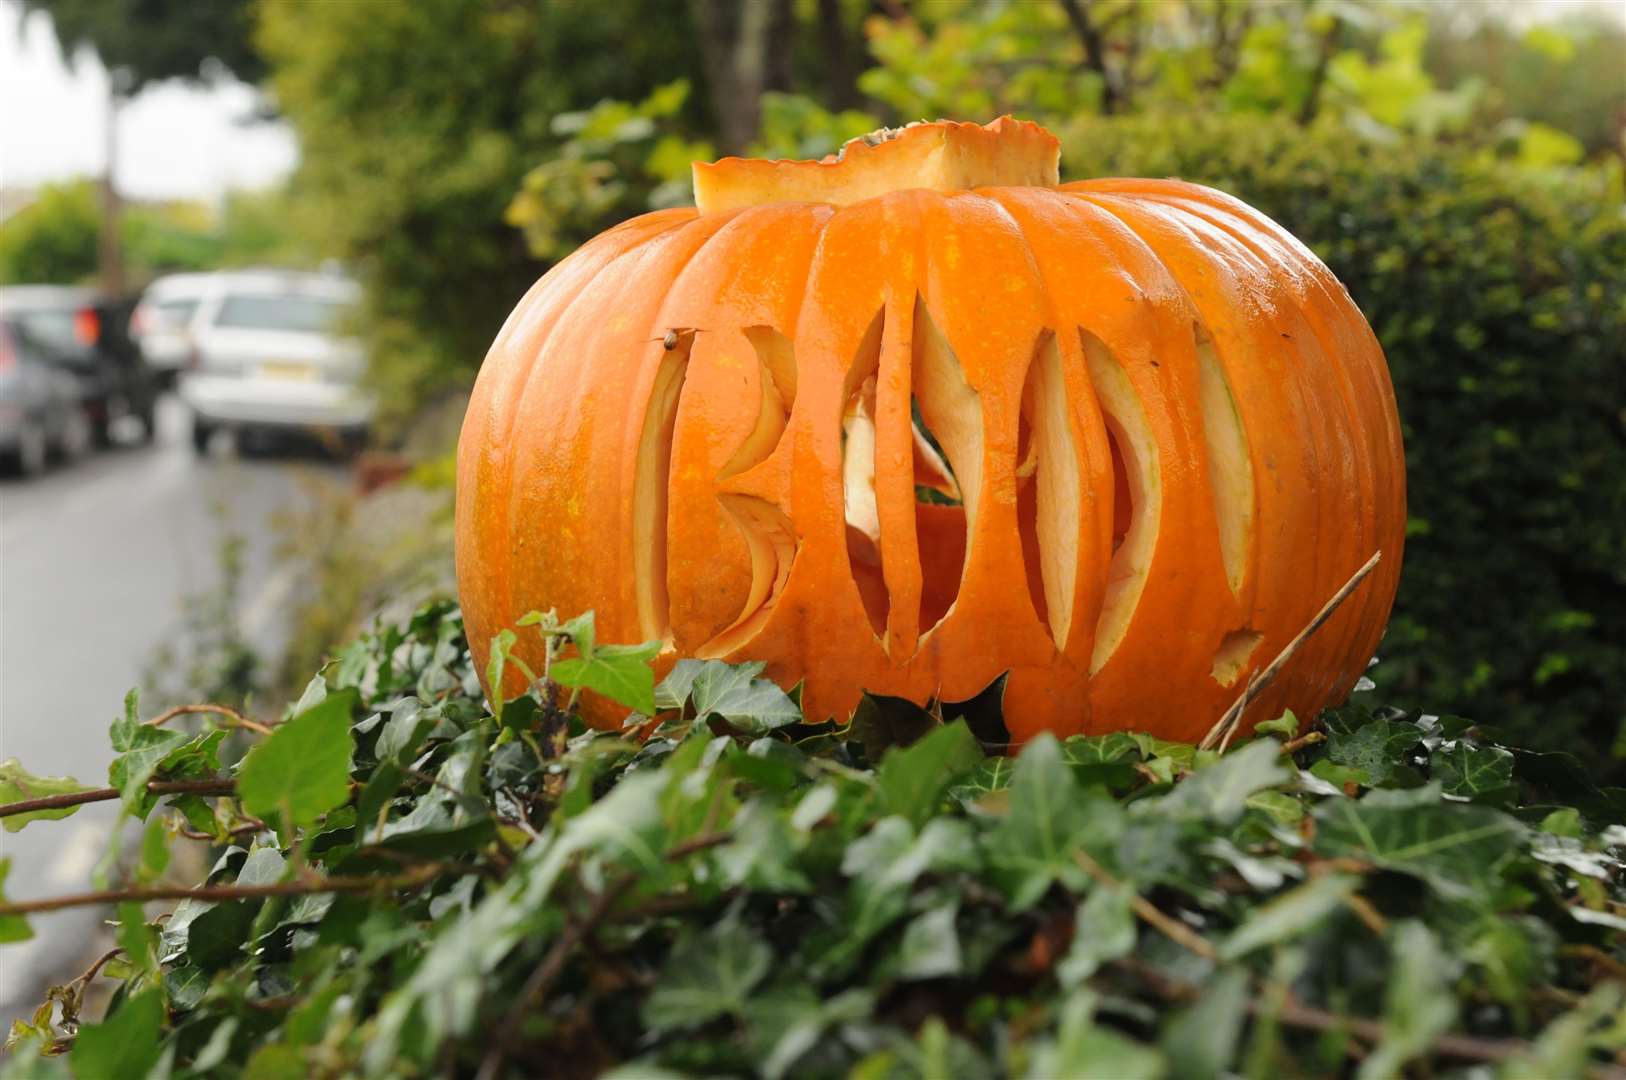 Placing the pumpkin on a damp surface or exposing it to the elements might introduce damp or mould